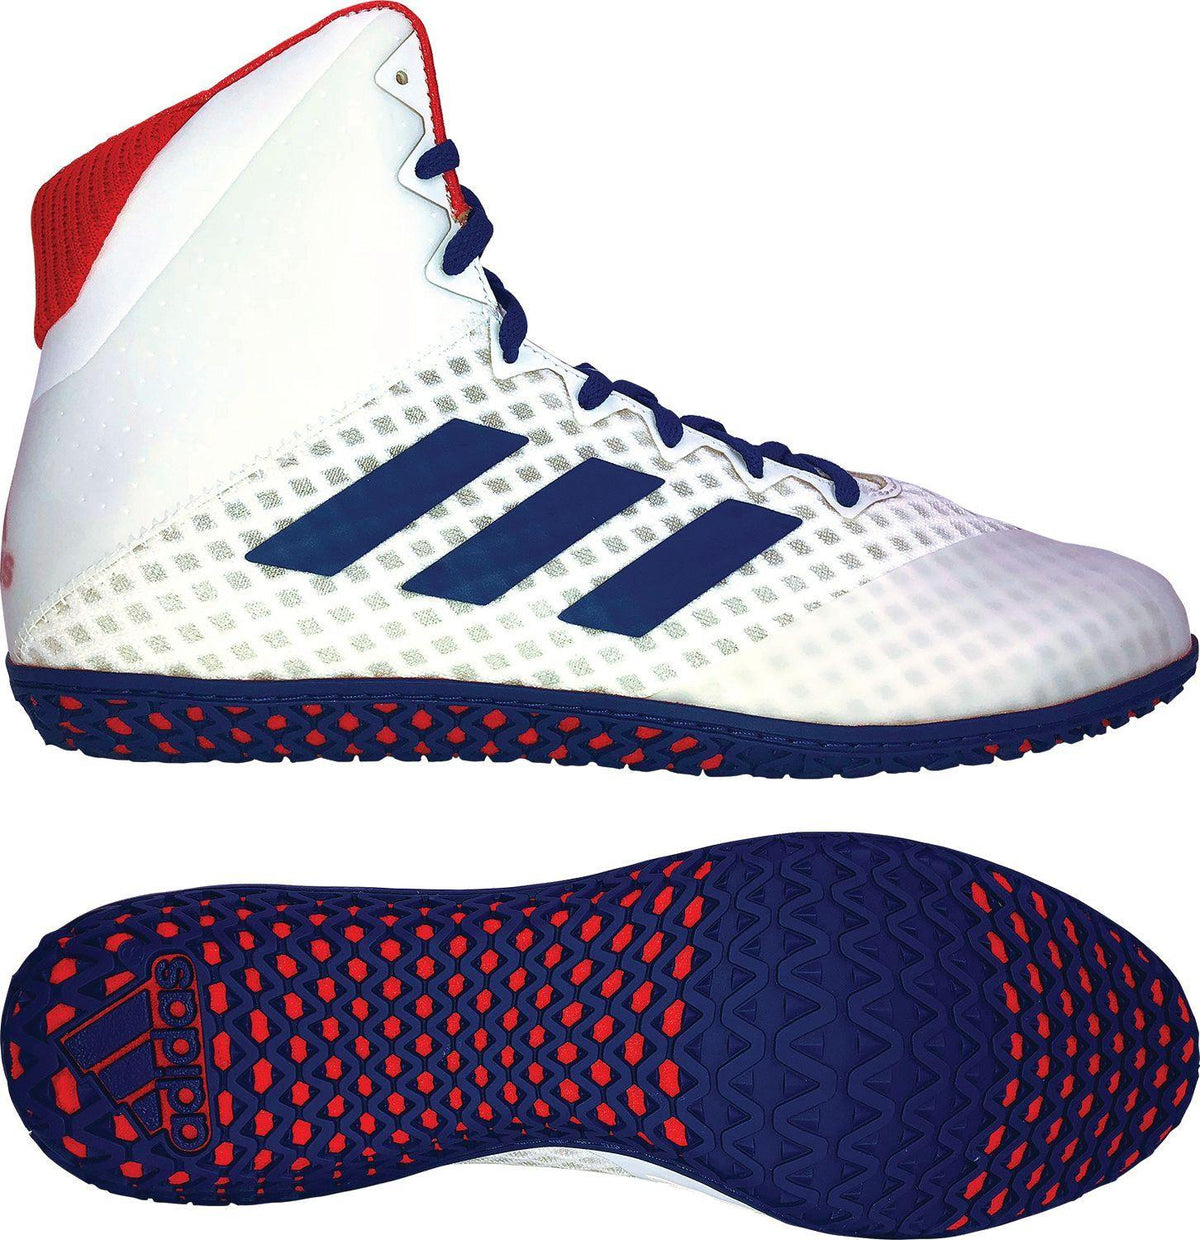 adidas Wrestling - Mat Wizard 5 Wrestling shoes for only $100! One Day Only  - SAVE $40! No other discounts will apply. Get the Wizards:   #laborday #labordaysale #wrestling  #adidaswrestling